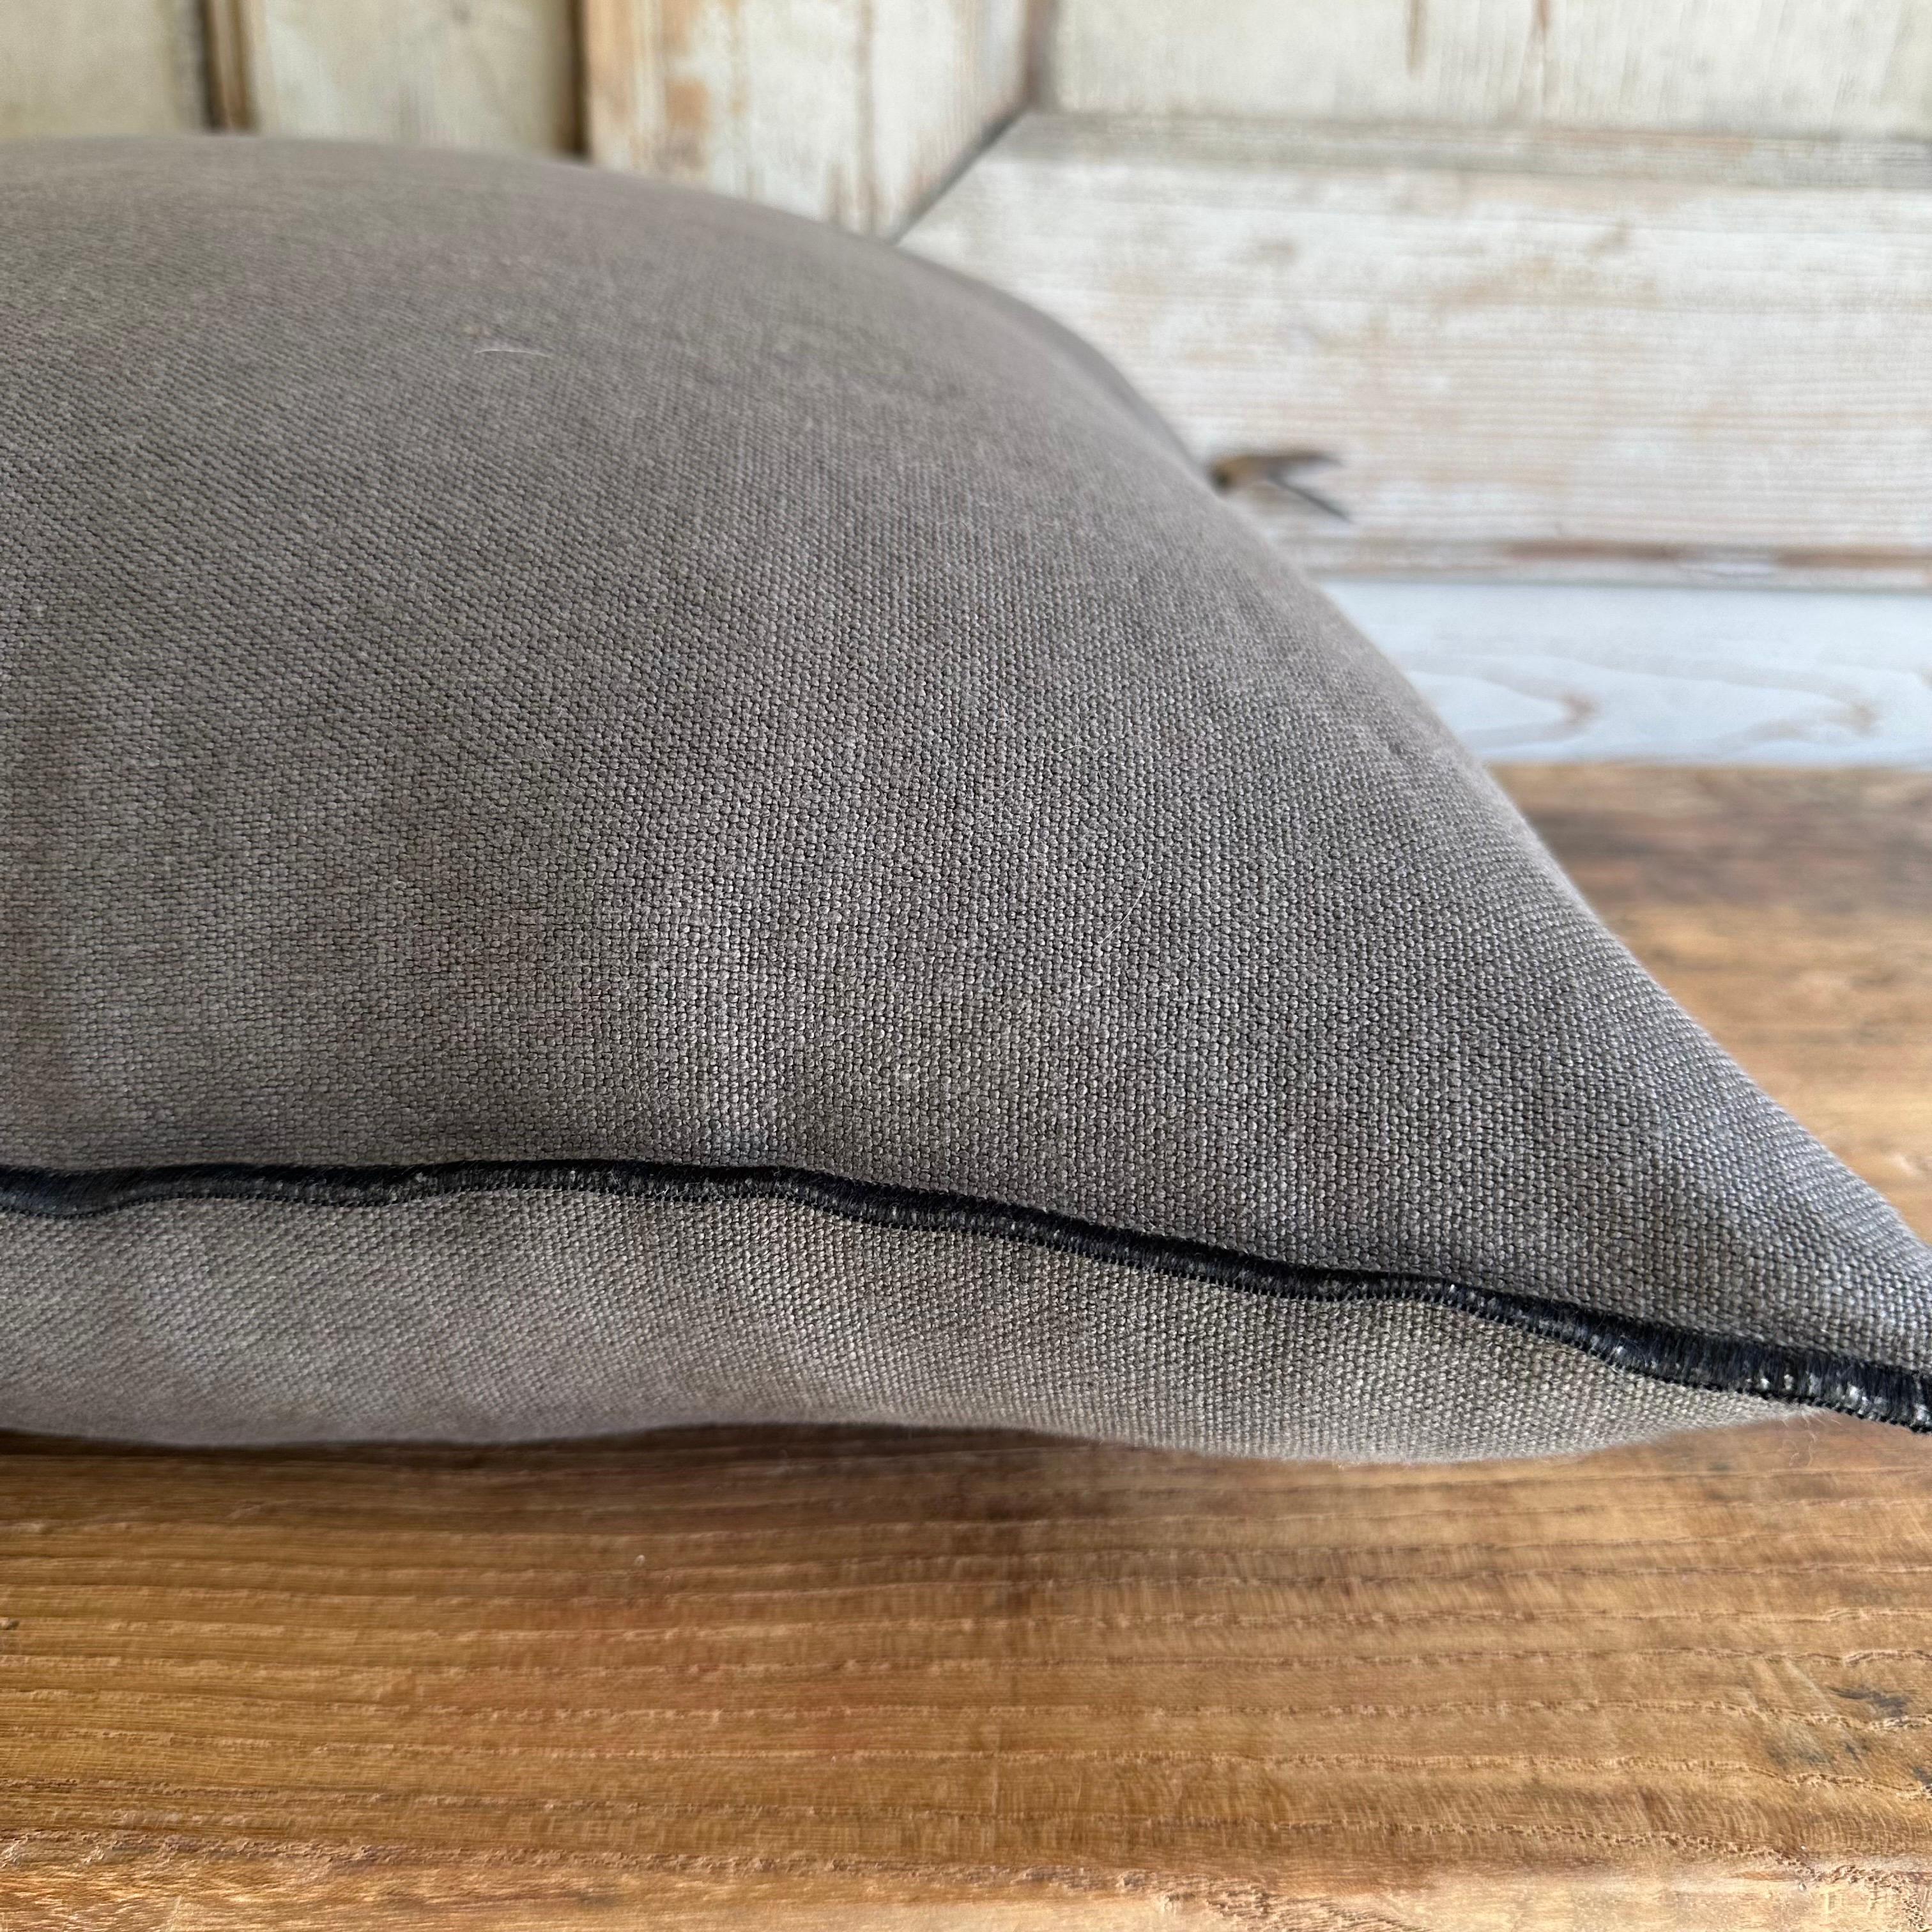 Stone Washed French Linen Accent Pillow in Castor For Sale 1